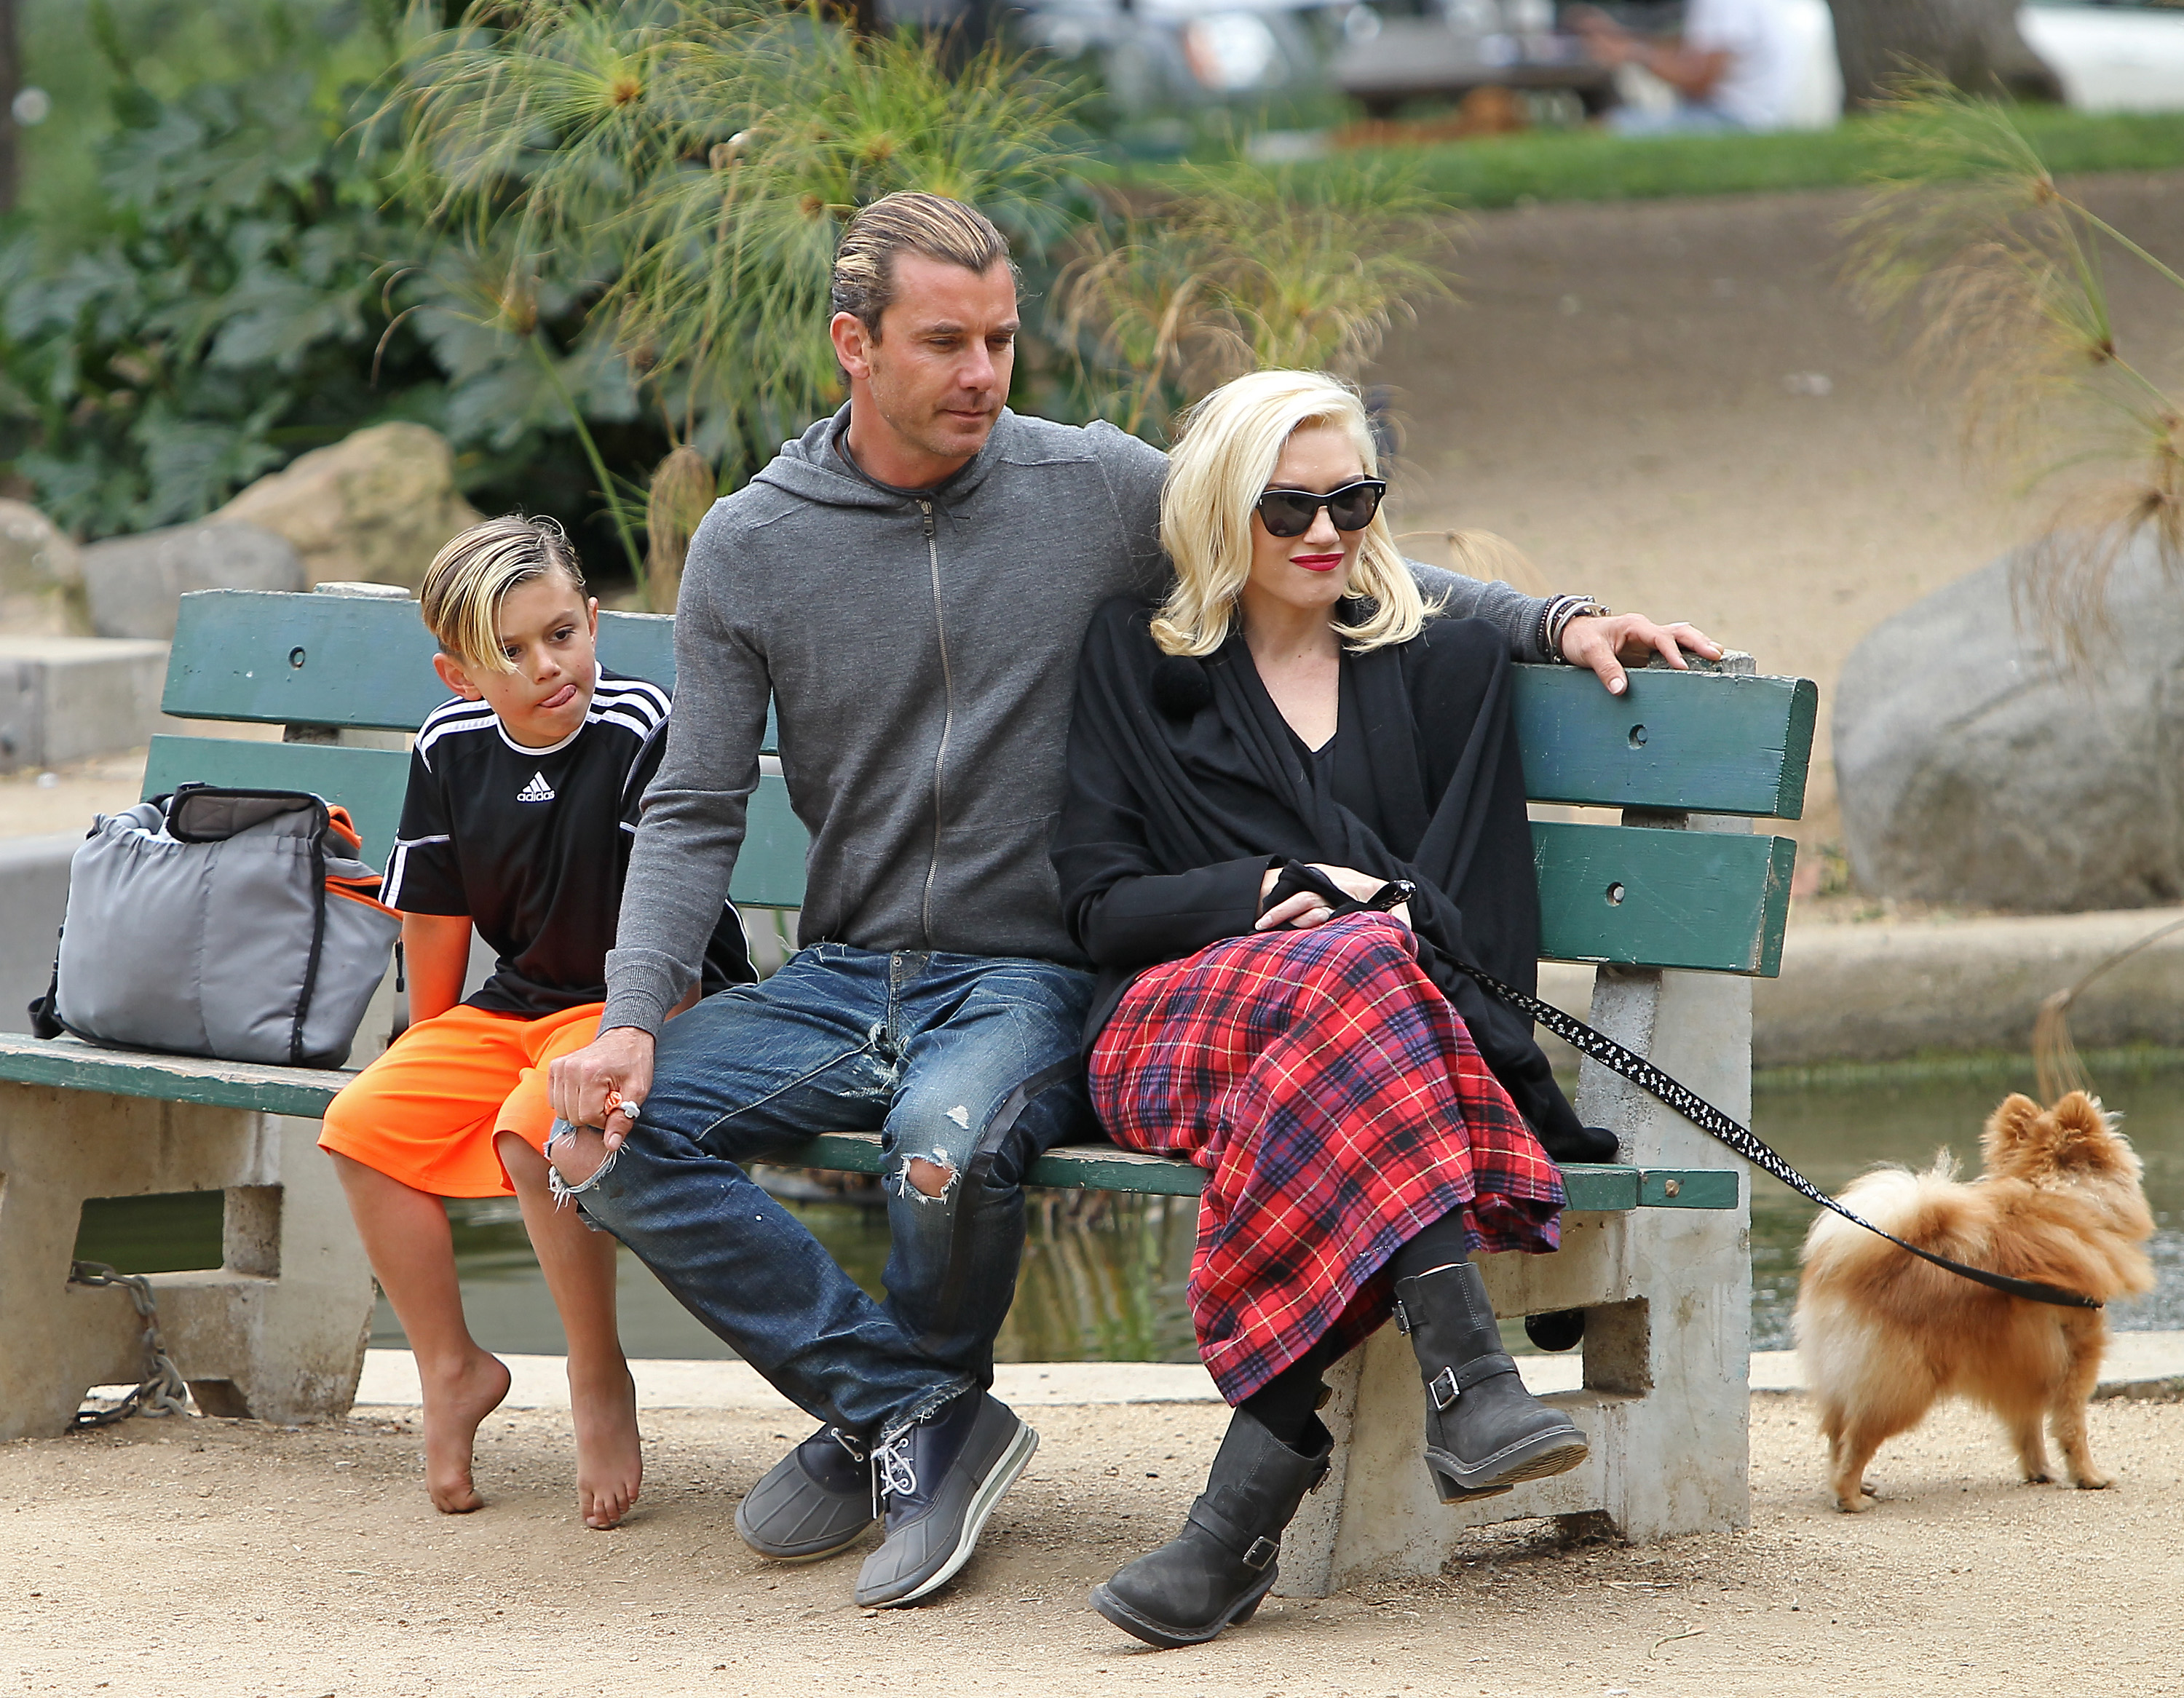 Kingston Rossdale, Gavin Rossdale, and Gwen Stefani spotted in Los Angeles, California | Source: Getty Images